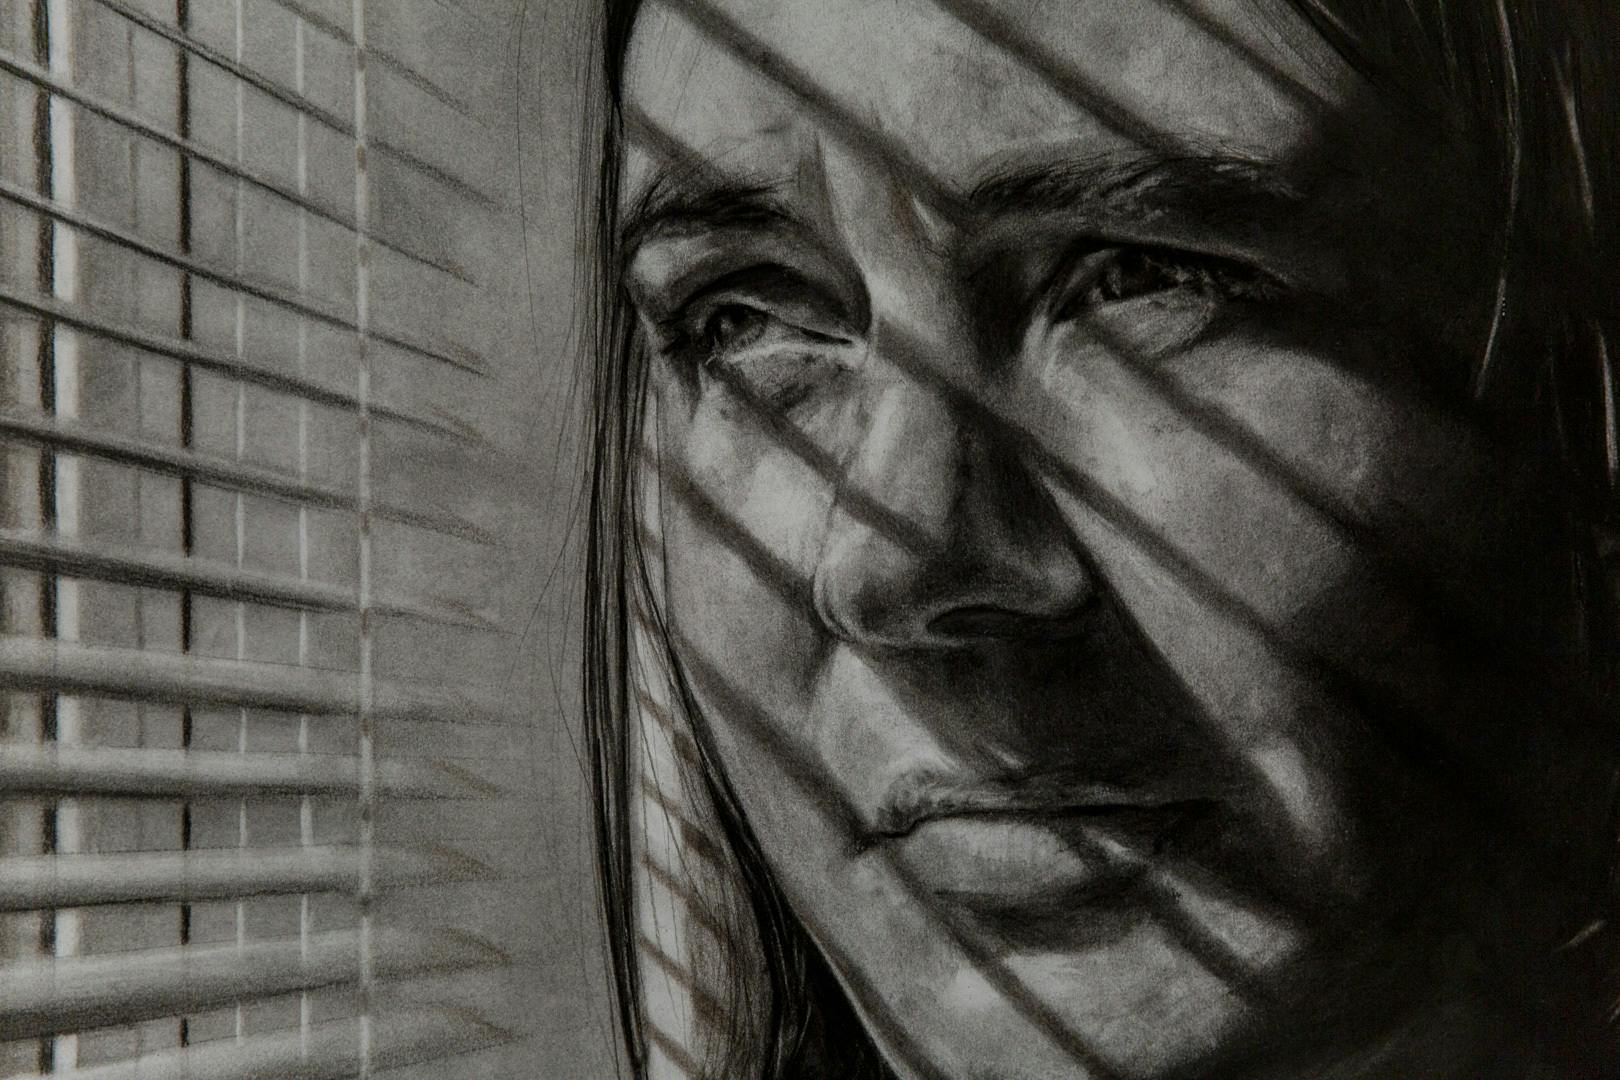 A black and white hand drawn pencil image of a woman staring out of a window with blinds leaving shadows on her face